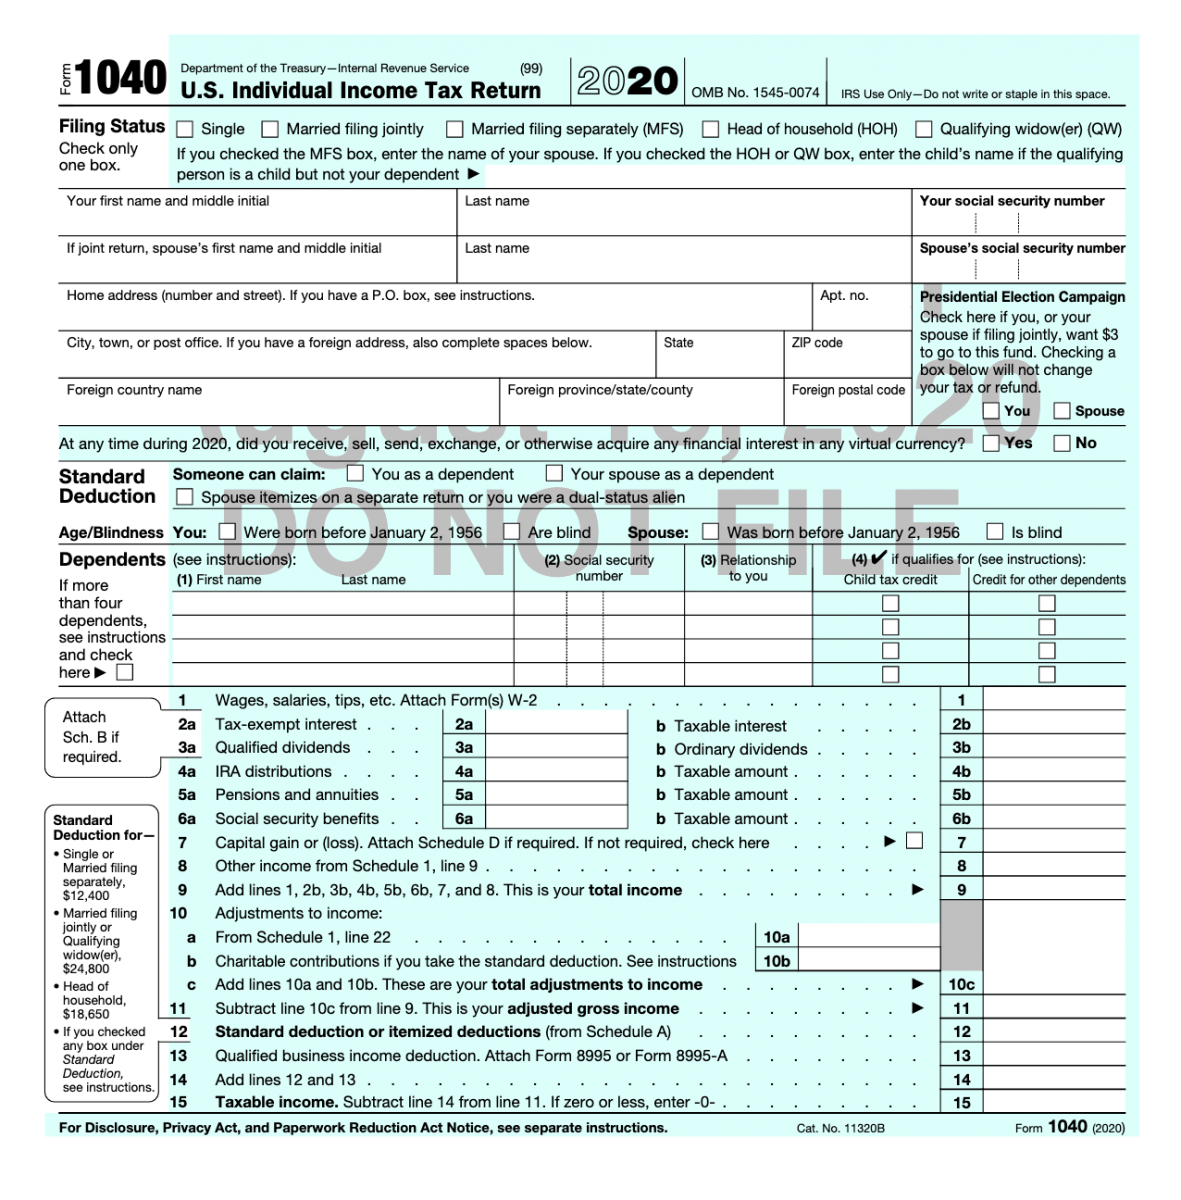 What'S New On Form 1040 For 2020 | Taxgirl # in Irs Form 1040 The Same As W2